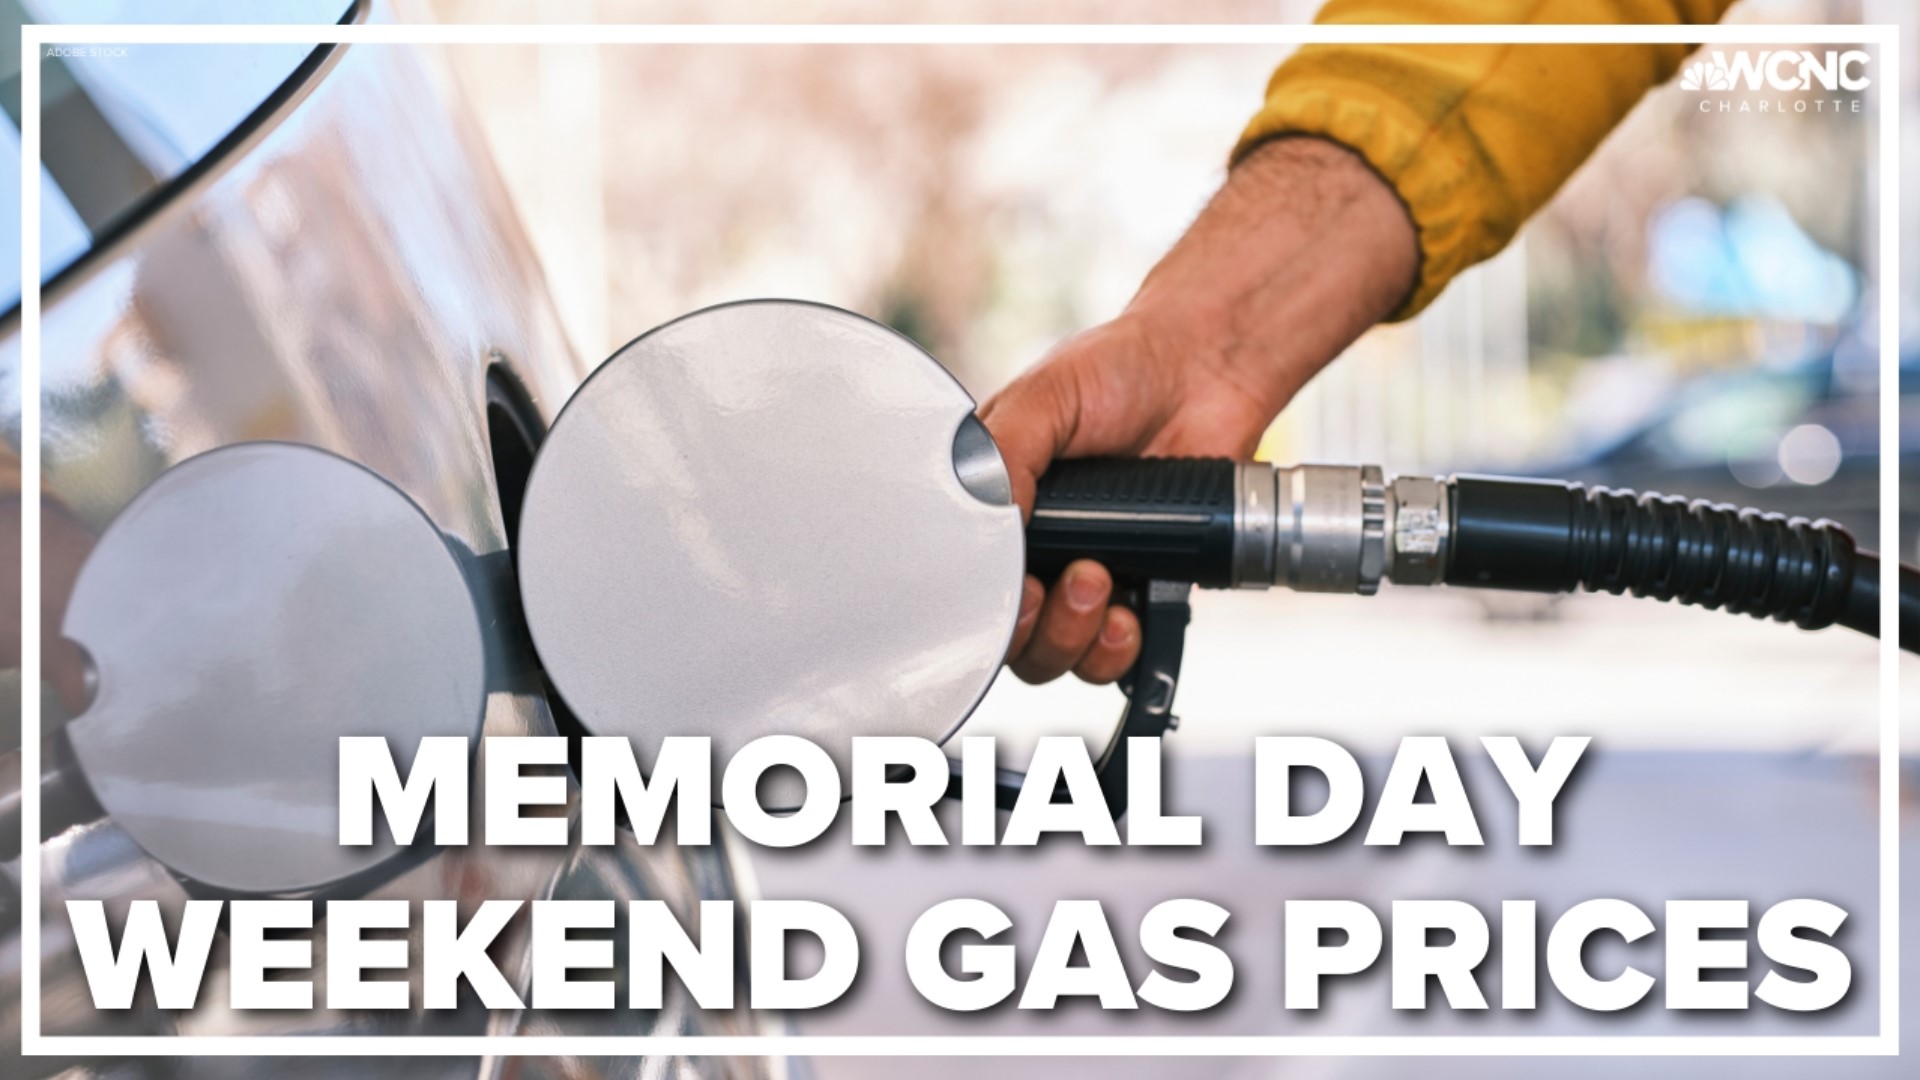 Memorial Day weekend gas prices are setting a record high.